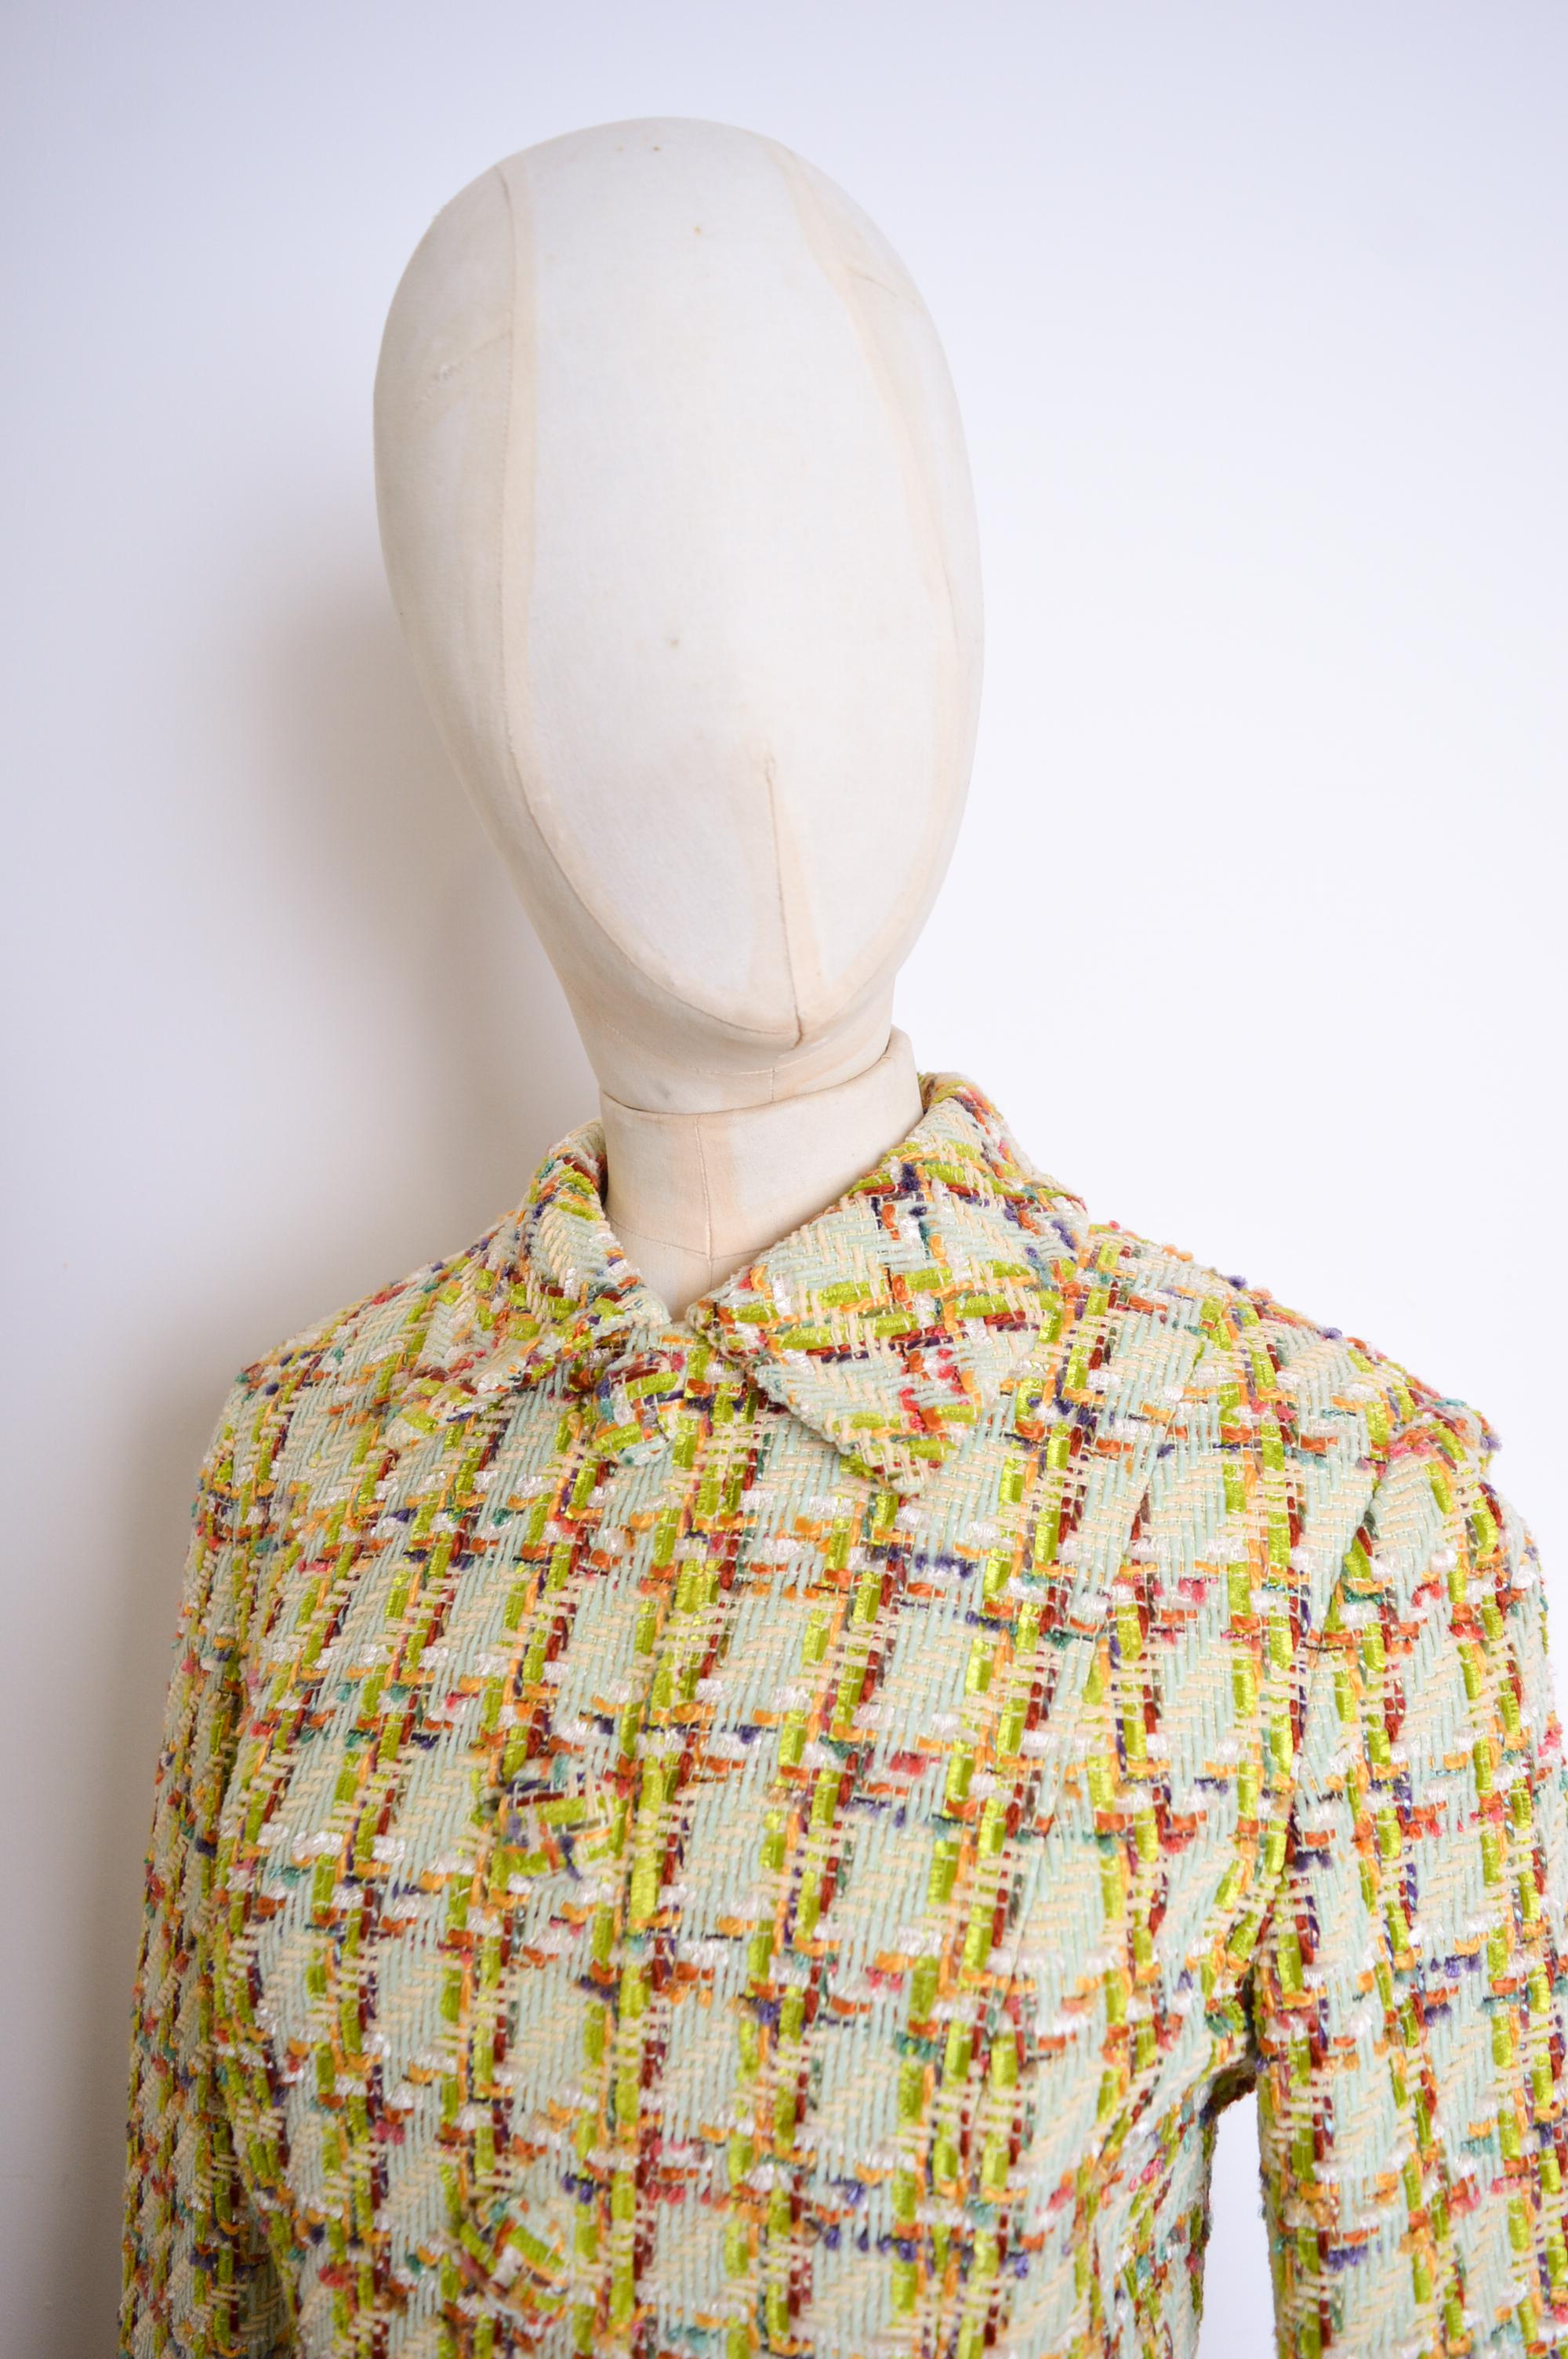 Women's S/S 1993 ROCHAS Jewel Tone Lime Green Tweed Boucle Jacket & Skirt Matching Set For Sale